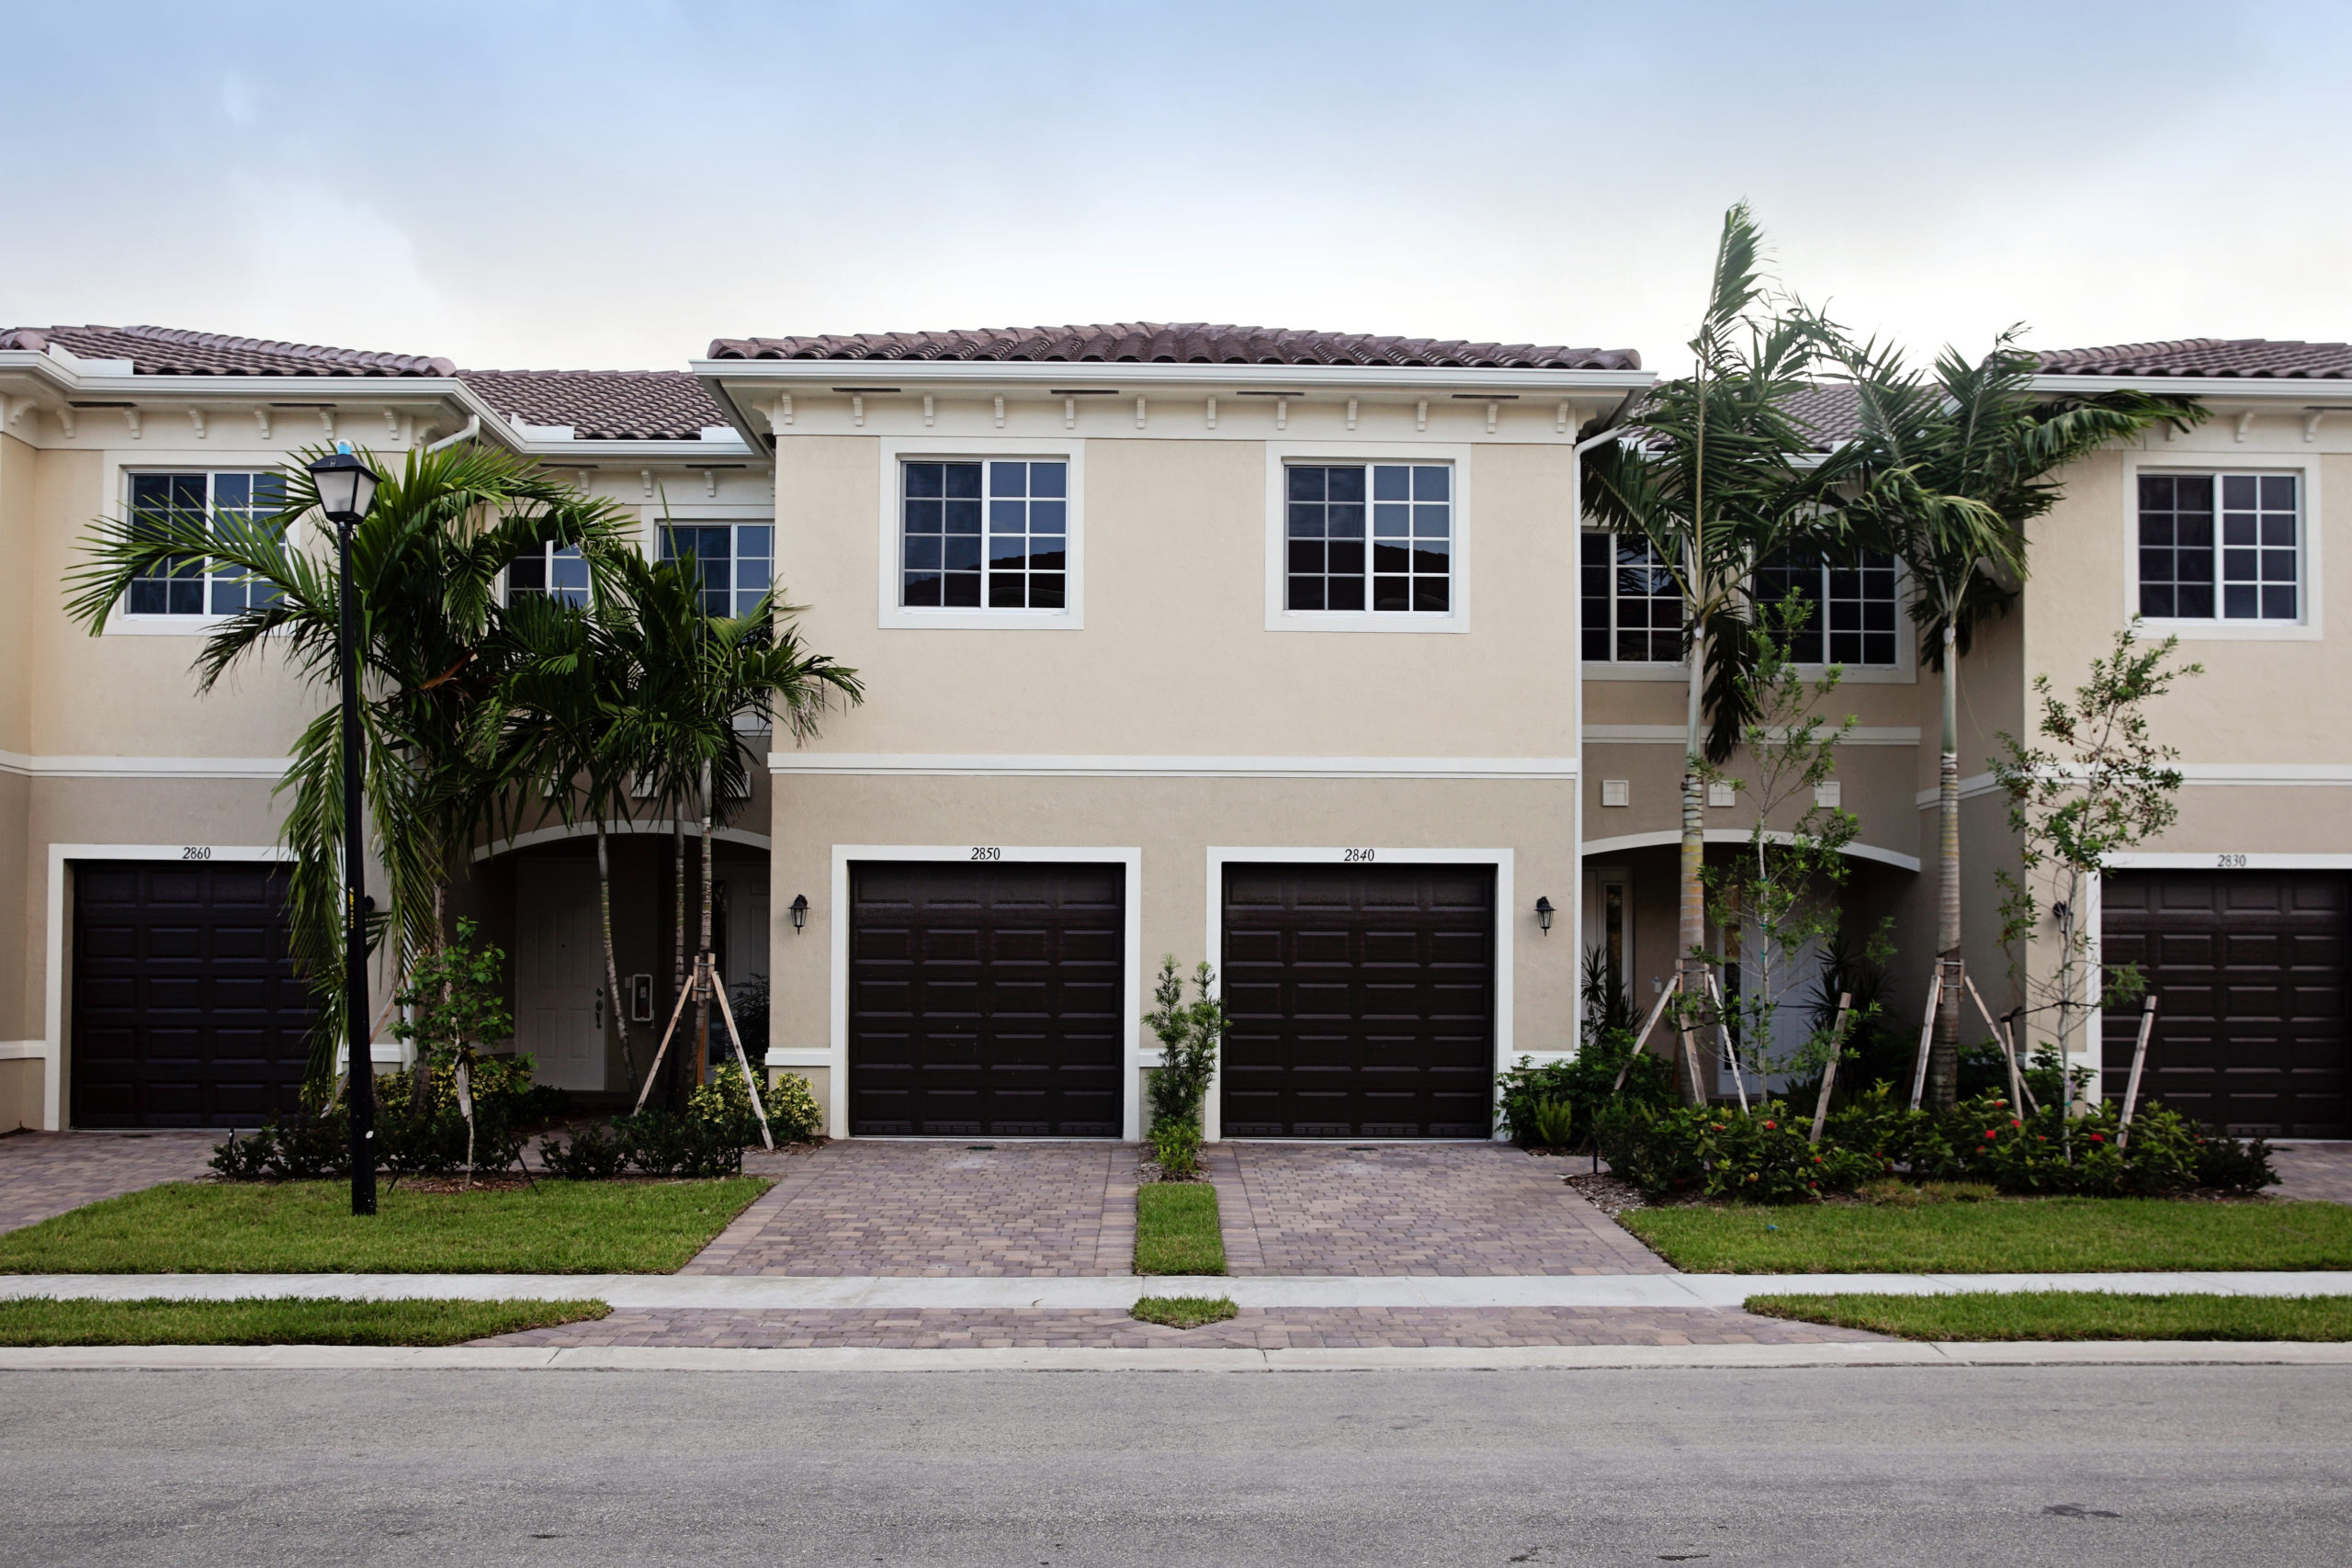 Calabria Residences: ONLY ONE unit remaining at $269,000!